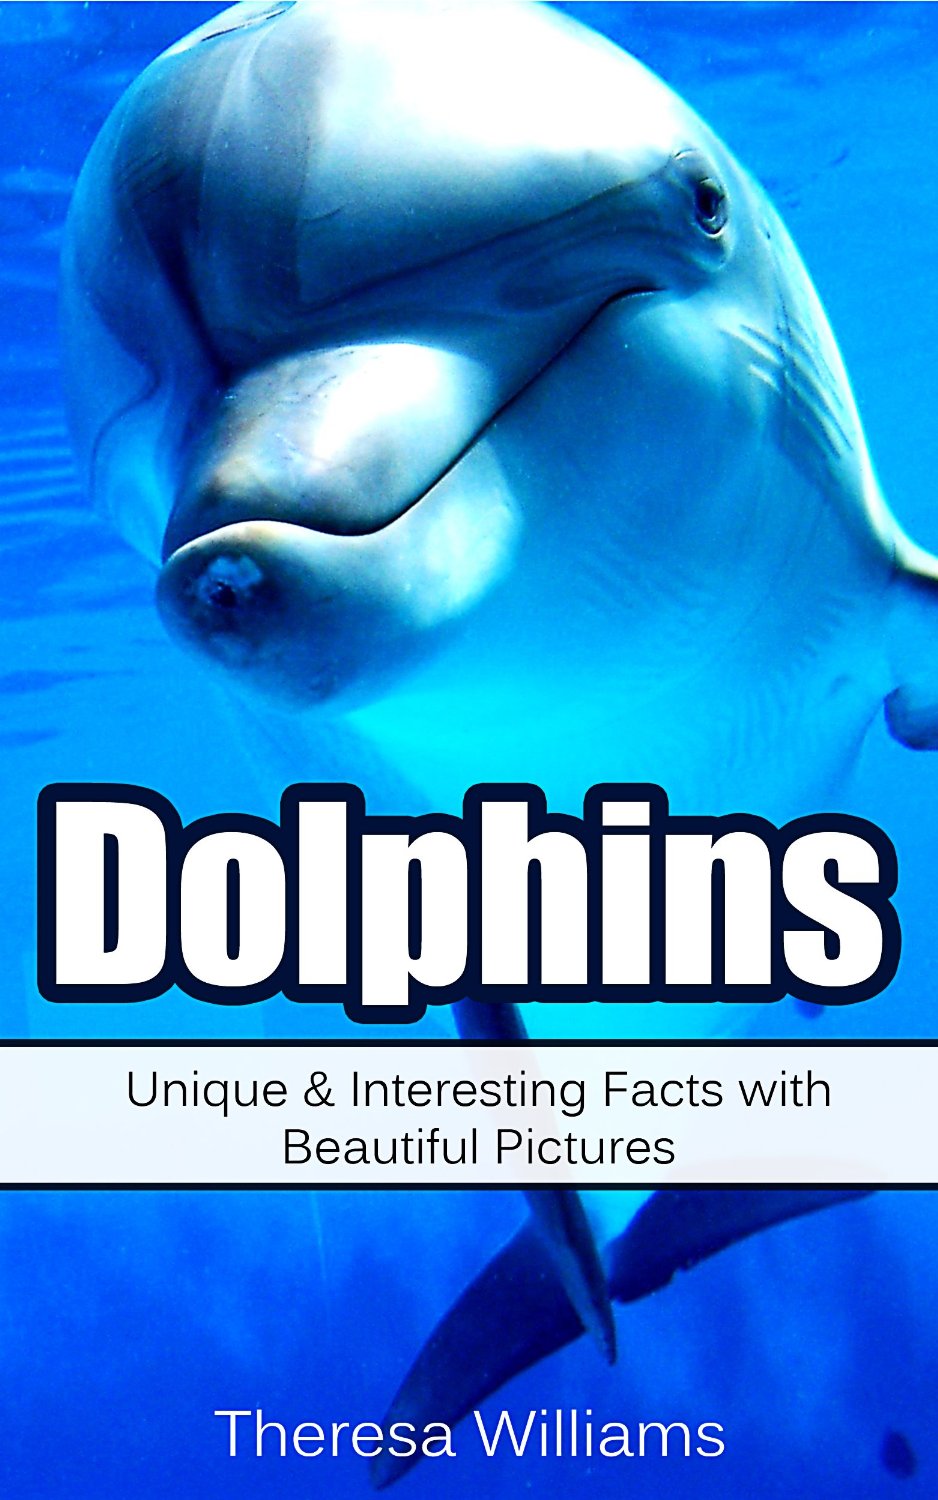 Dolphins: Unique & Interesting Facts with Beautiful Pictures by Theresa Williams